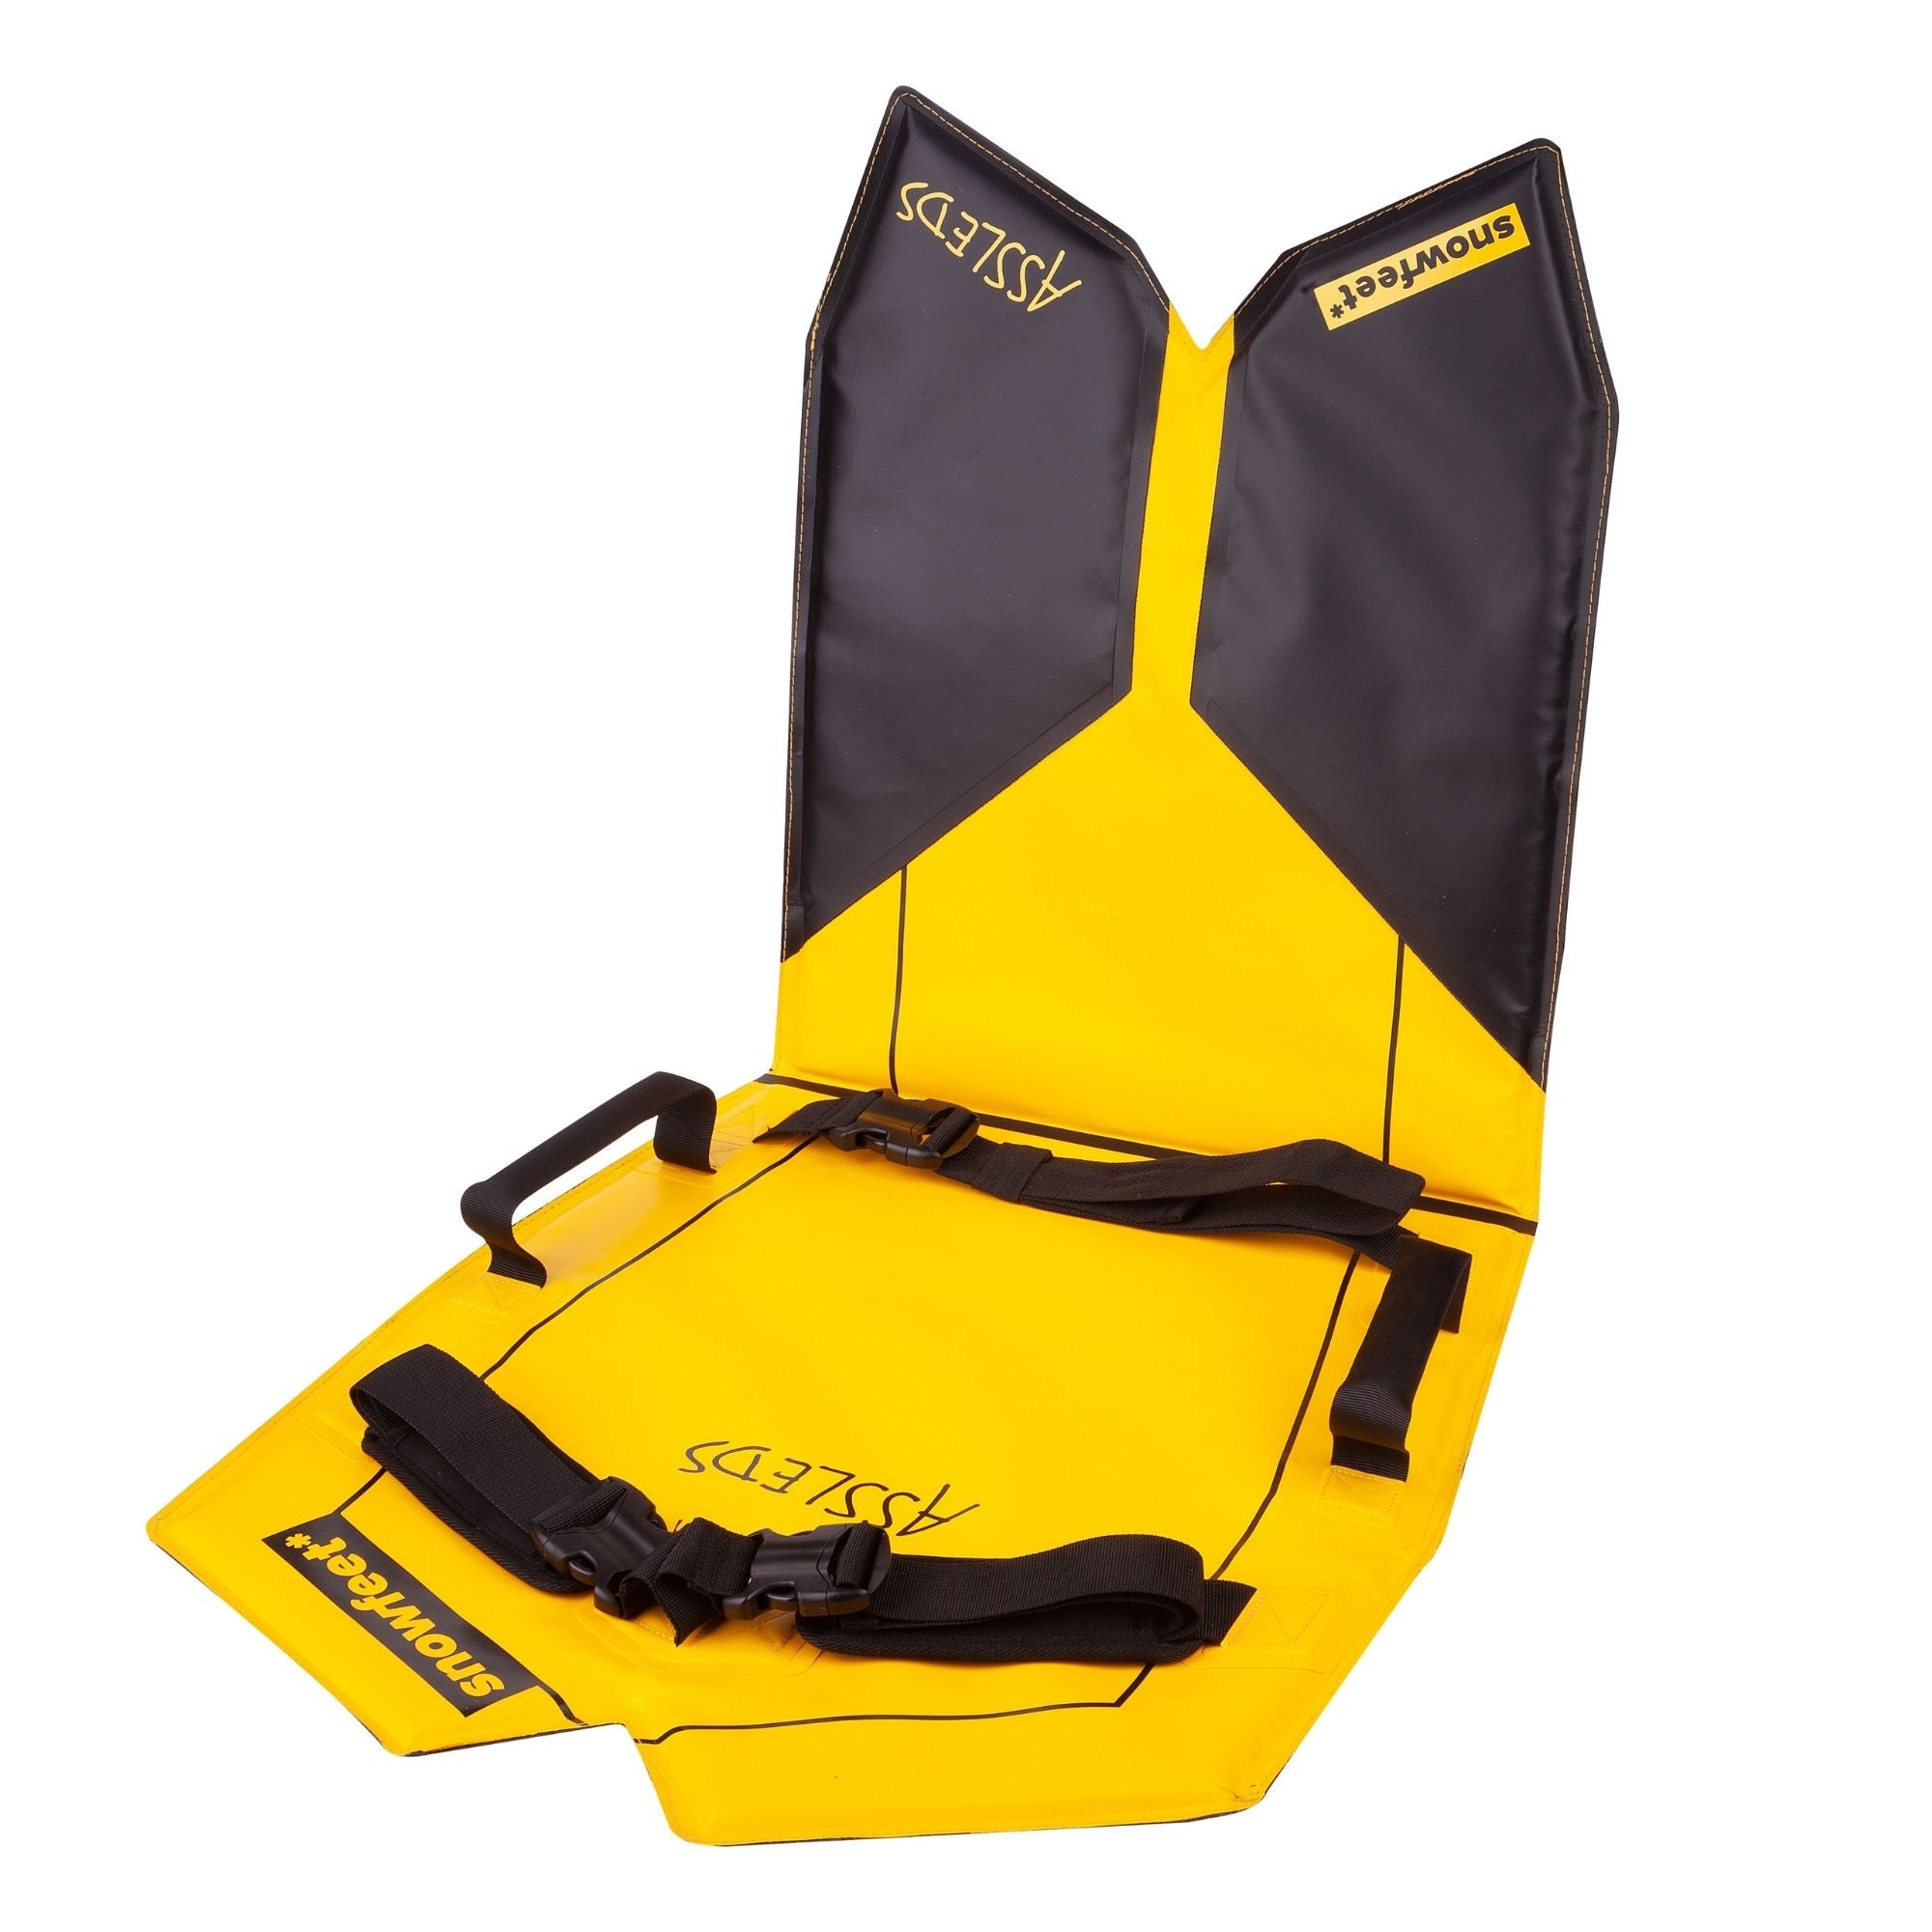 Assled - Wearable Foldable Snow Sled - Sledge for Adults and Kids - by Snowfeet Yellow